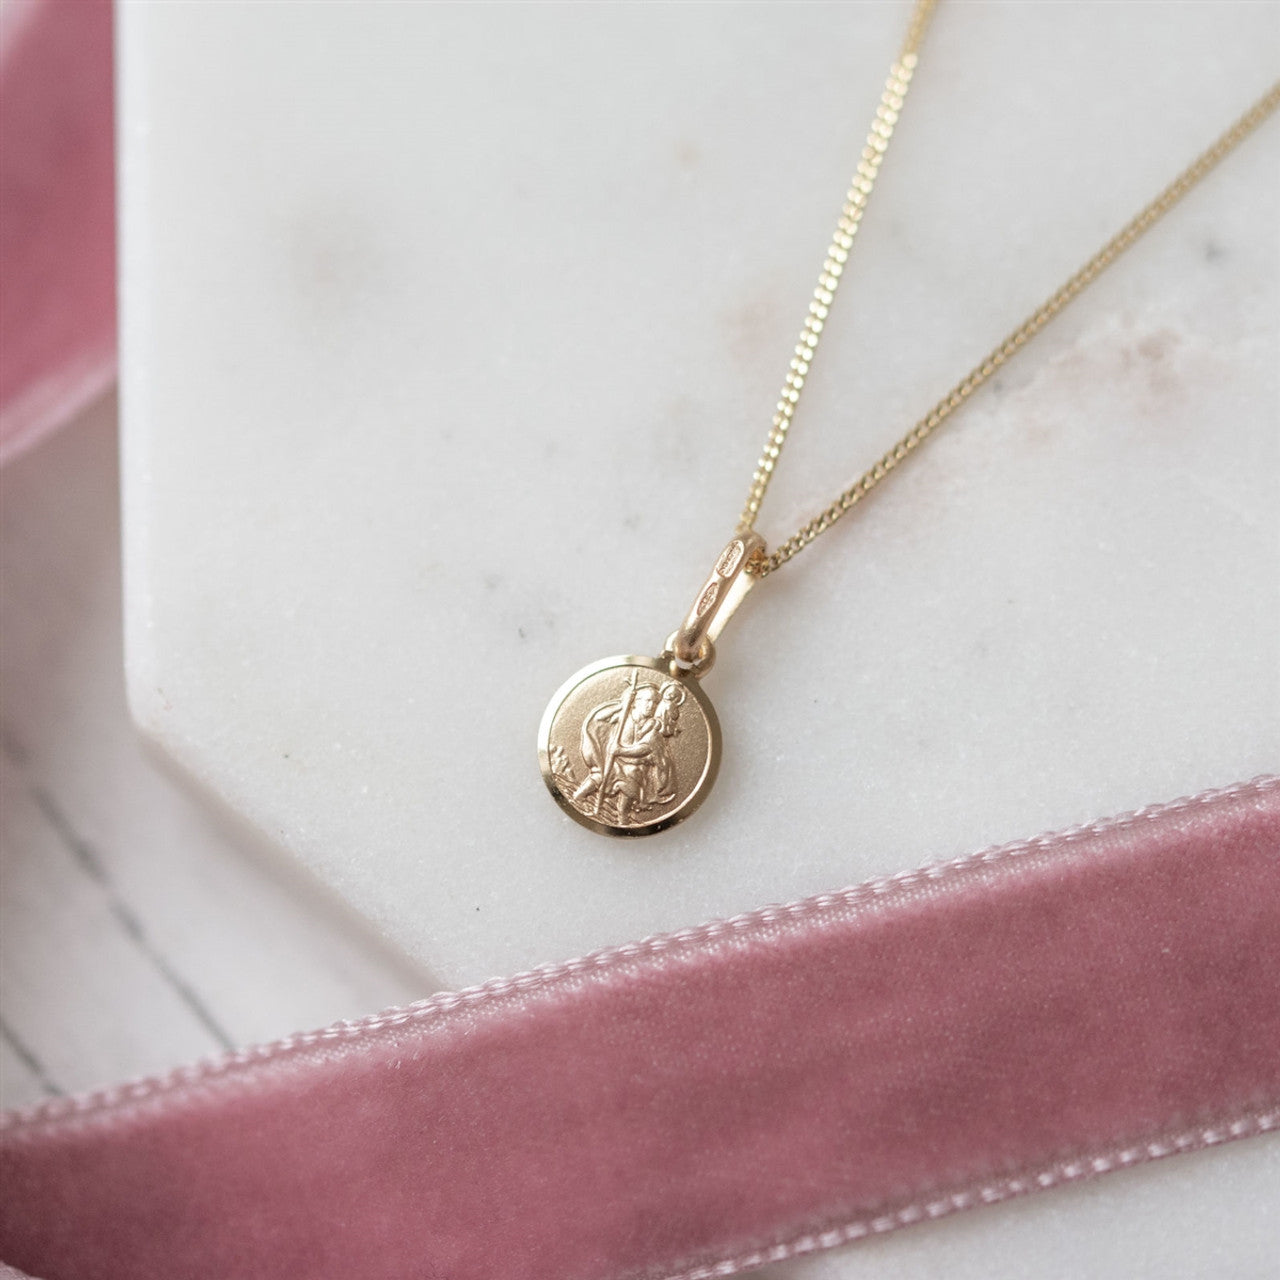 Tiny st christopher shown in 9 ct gold